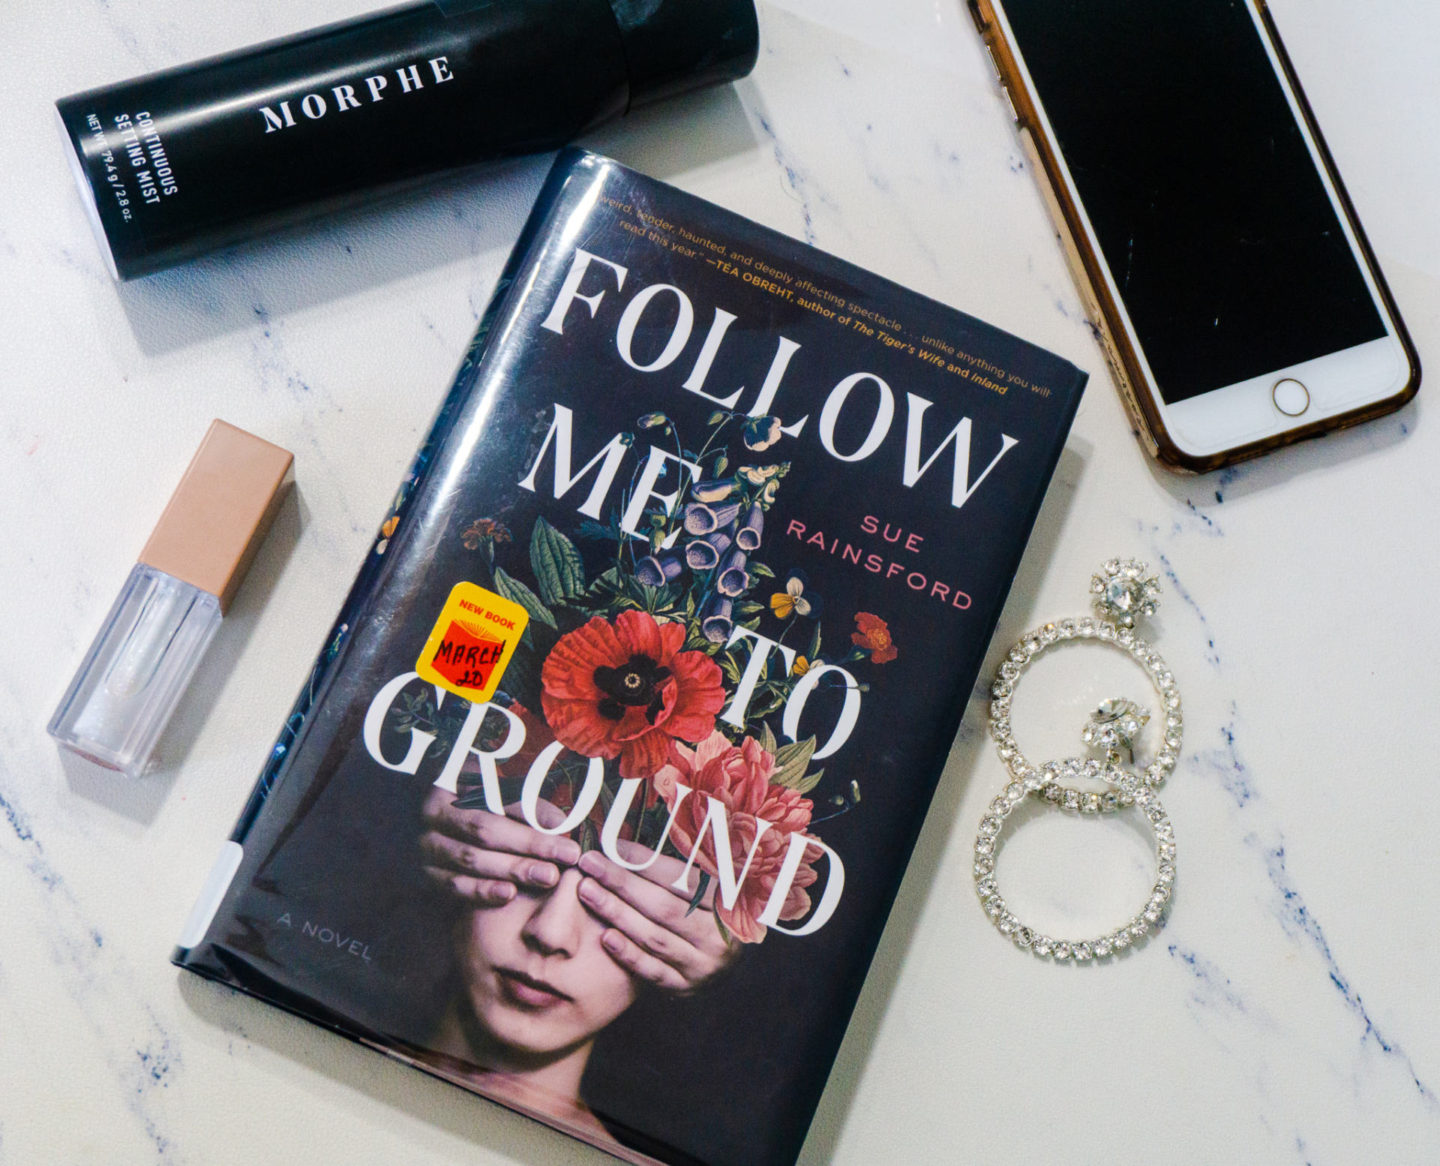 Follow Me To Ground Is An Innovative and Haunting Experience